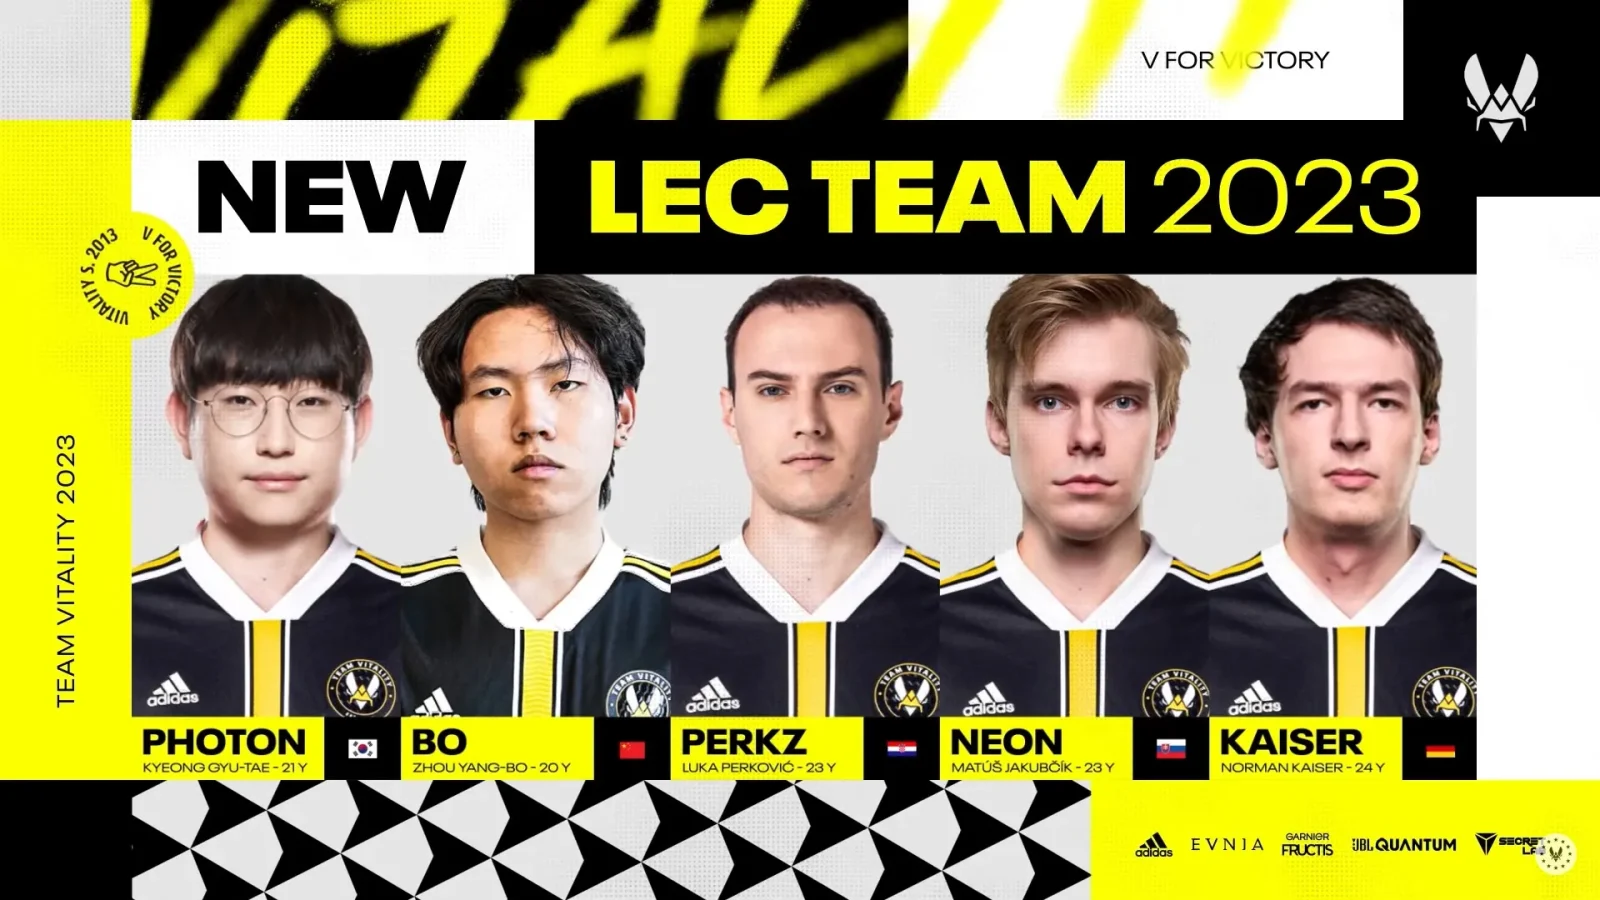 Team Vitality roster for LEC in 2023